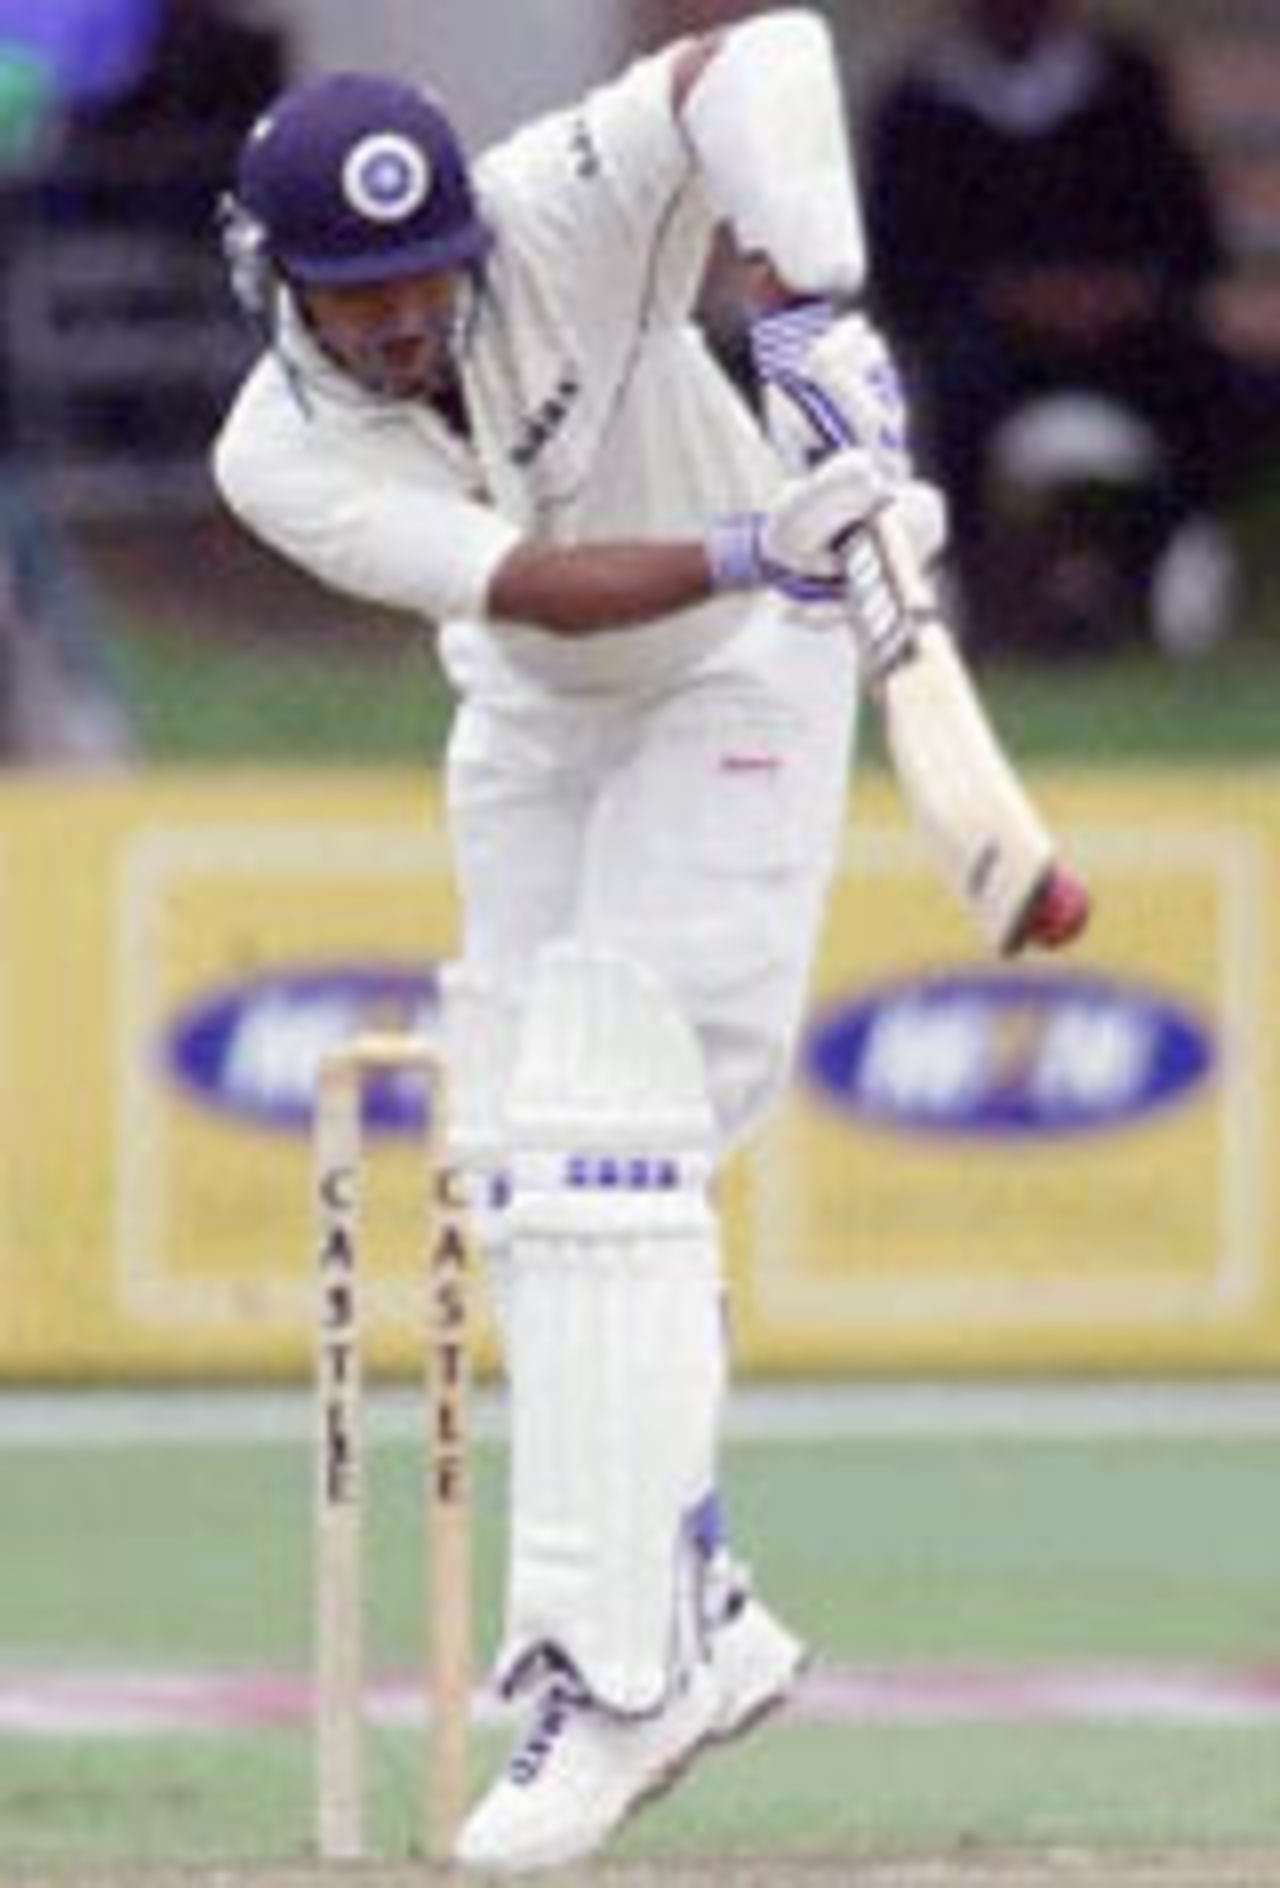 Deep Dasgupta plays the flick on the tour to South Africa, South Africa v India, 2nd Test, Port Elizabeth, 4th day, November 19, 2001